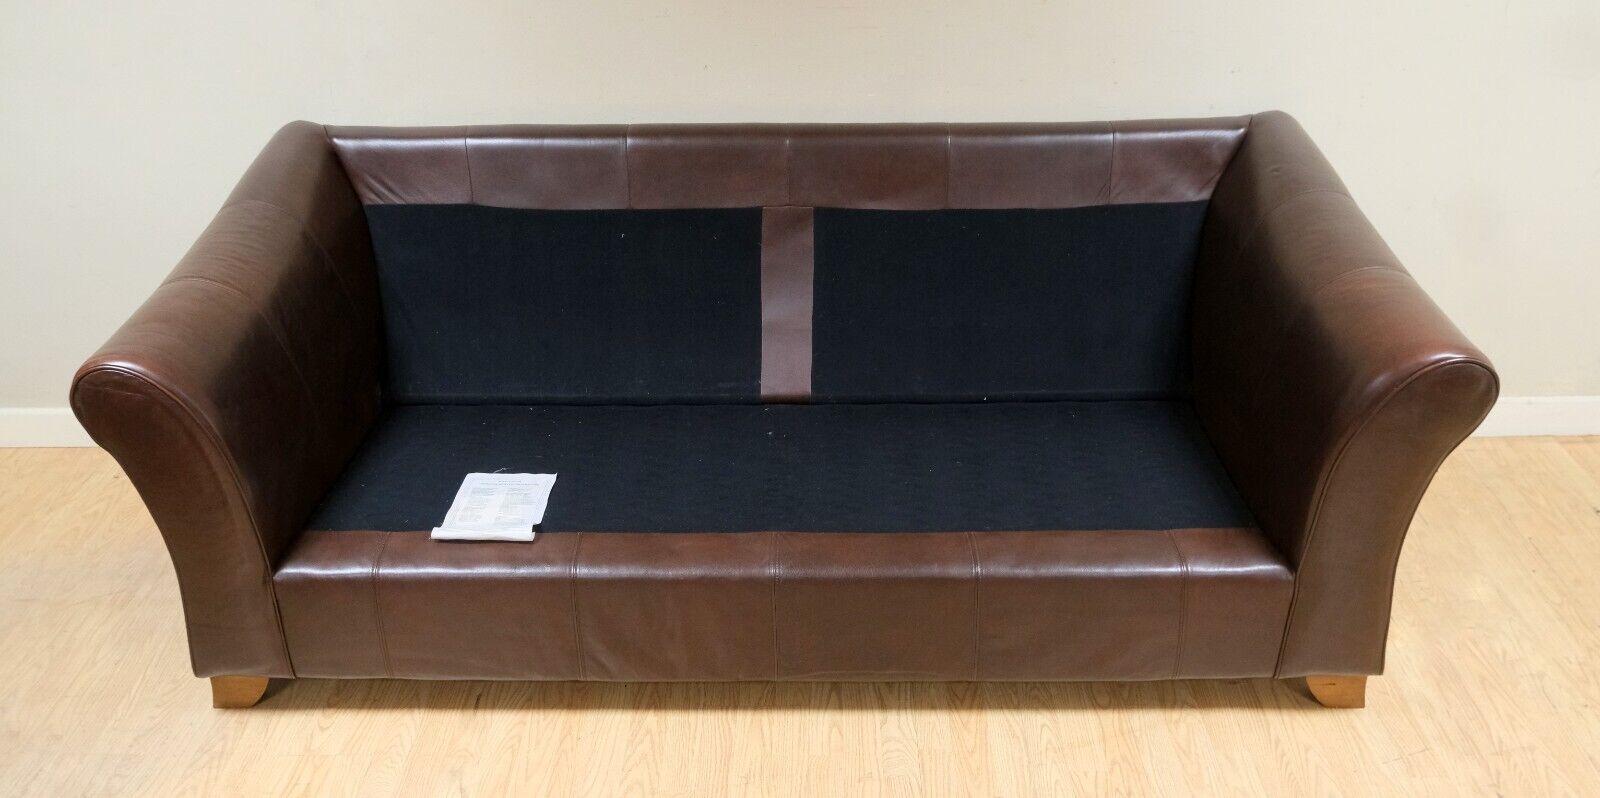 LOVELY MARKS & SPENCER ABBEY BRoWN LEATHER TWO SEATER SOFA ON WOODEN FEETs im Angebot 5